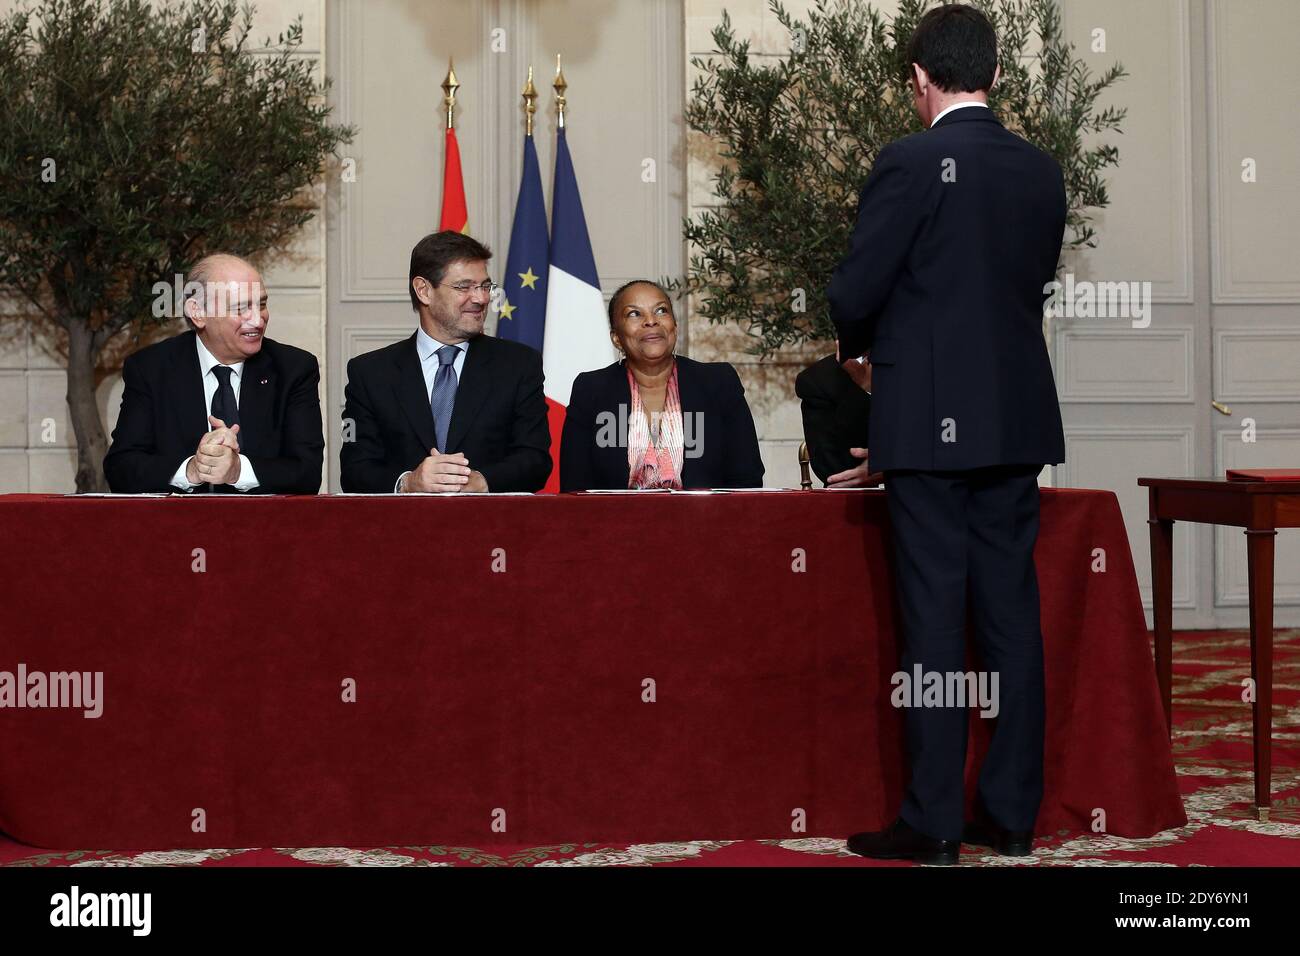 French Prime Minister Manuel Valls (R) looks on while Spanish Minister of the Interior Jorge Fernandez Diaz, Spanish Minister of Justice Rafael Catala, French Minister of Justice Christiane Taubira and French Minister of the Interior Bernard Cazeneuve wait to sign an agreement as part of the 24th Franco-Spanish Summit, at the Elysee Palace, in Paris, France on December 1, 2014. Photo by Stephane Lemouton/ABACAPRESS.COM Stock Photo